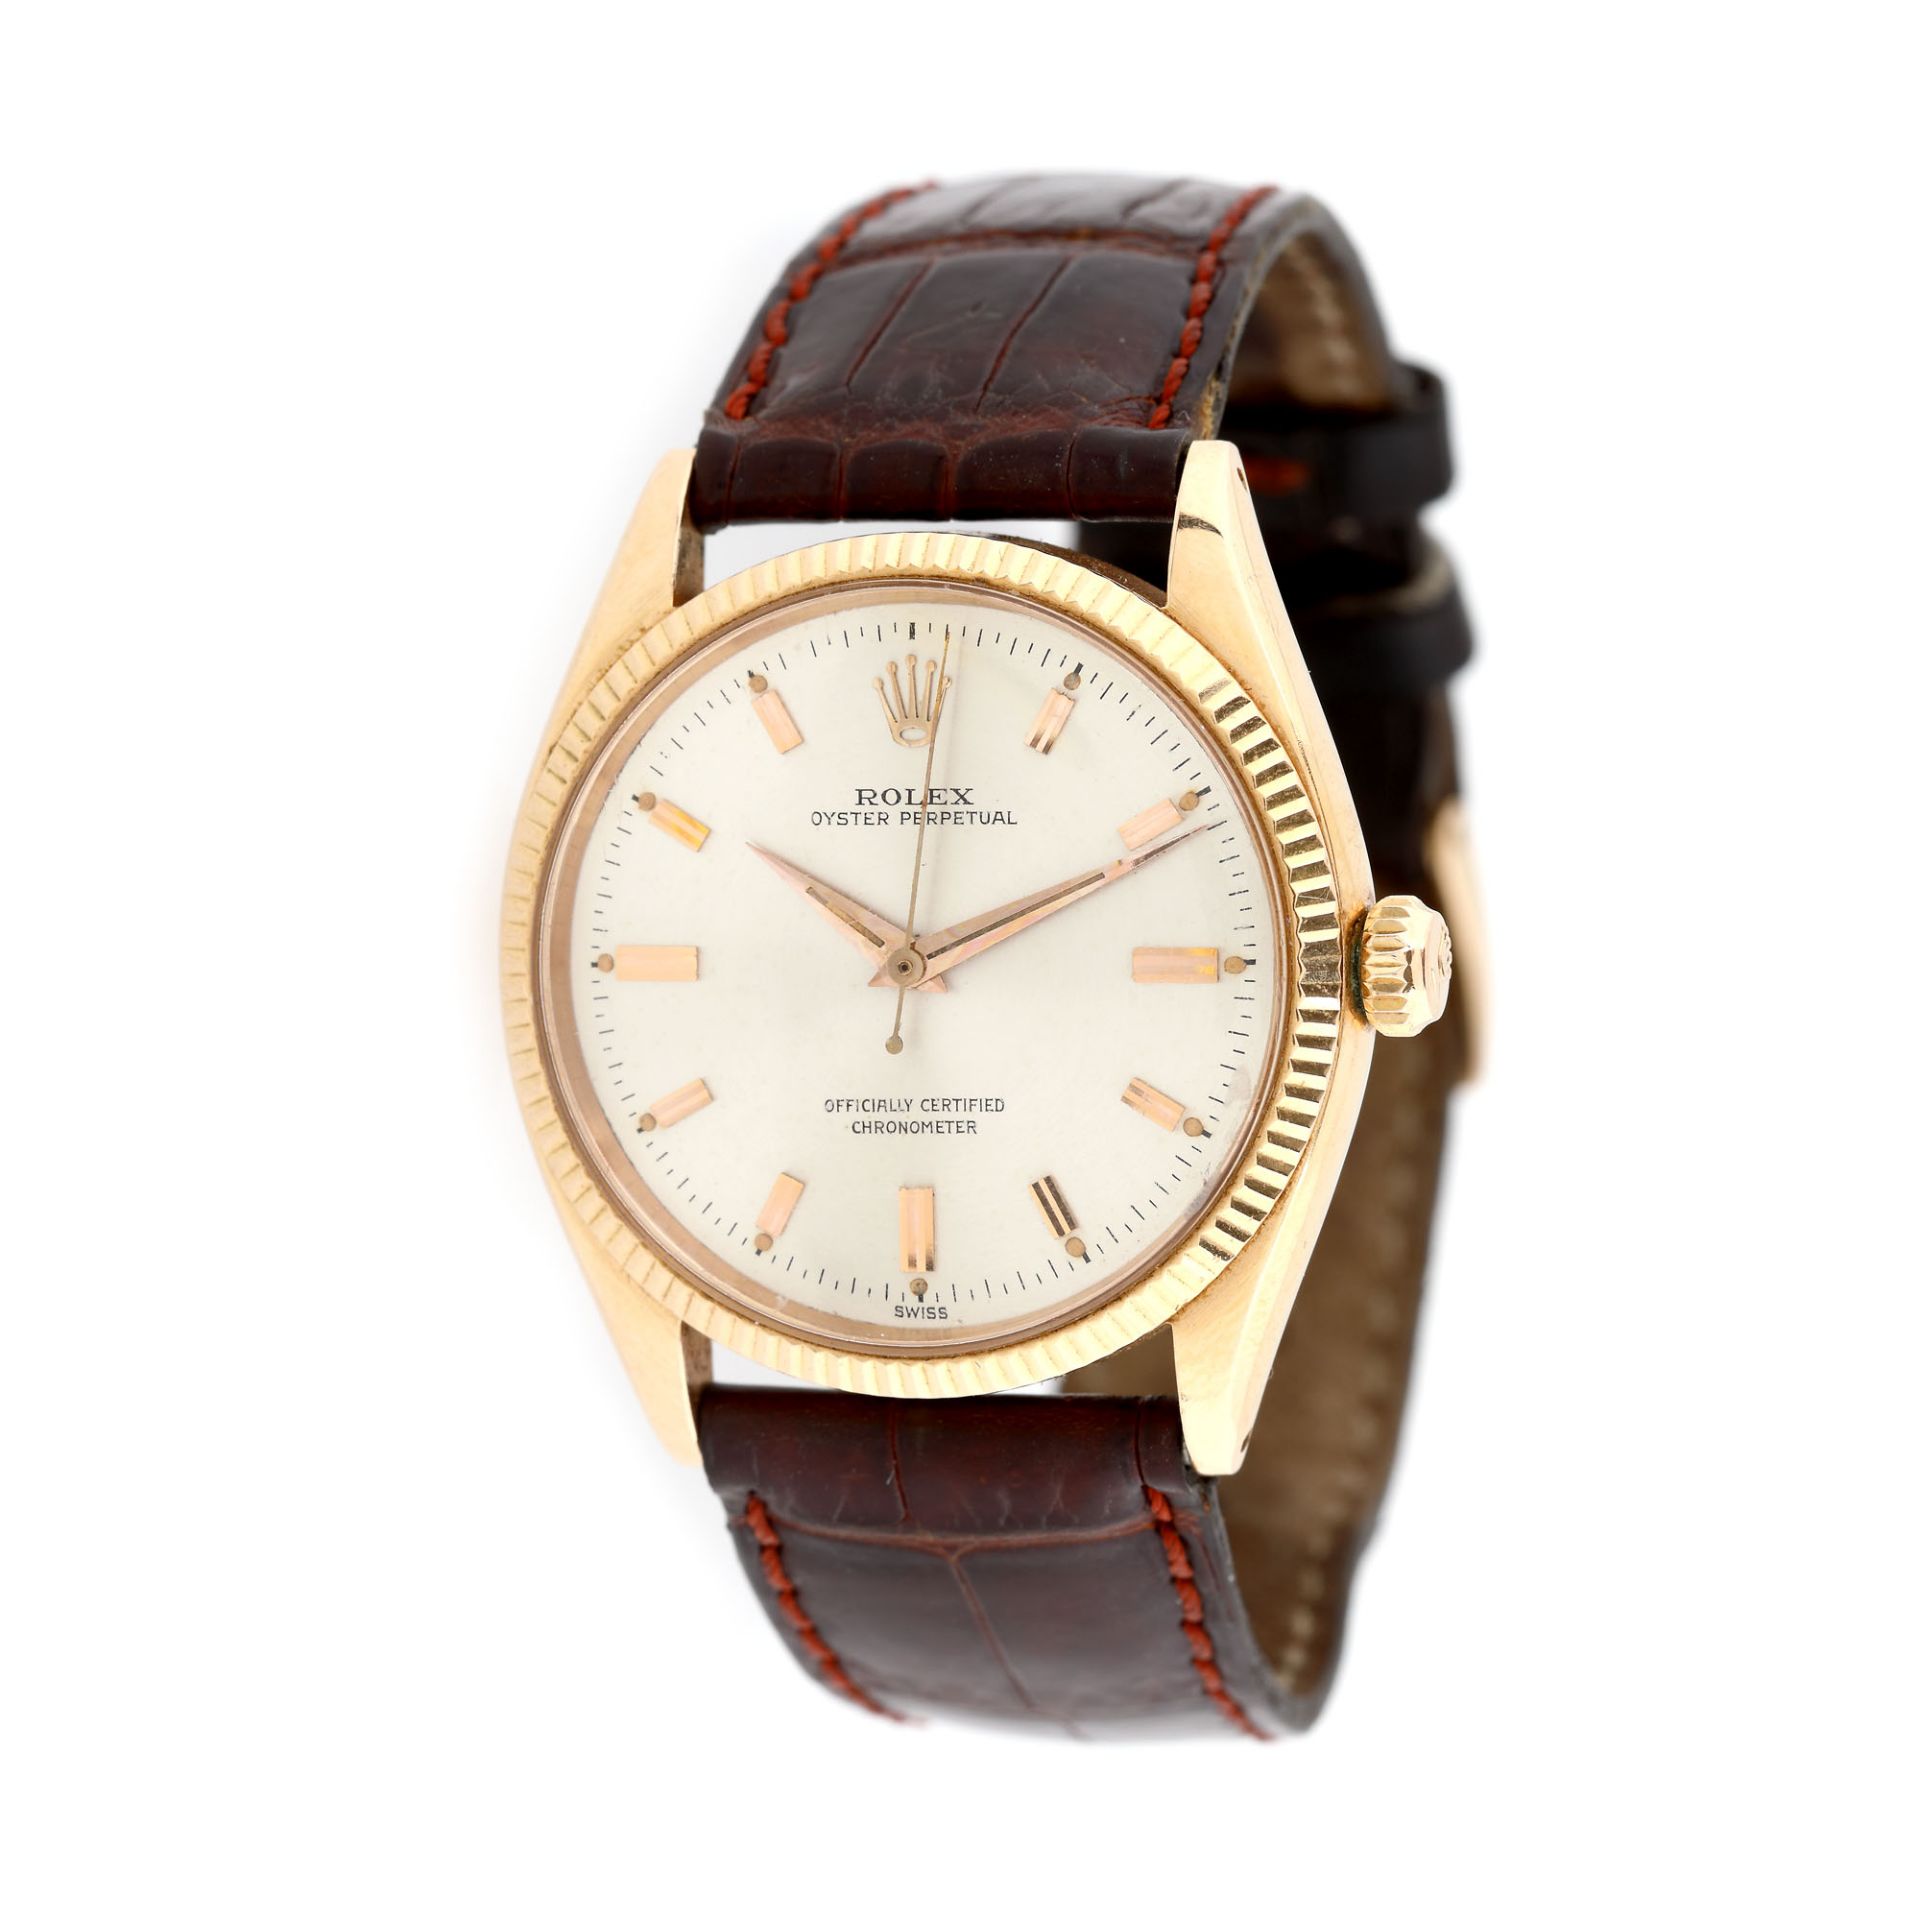 Rolex Oyster Perpetual, wristwatch, rose gold, unisex